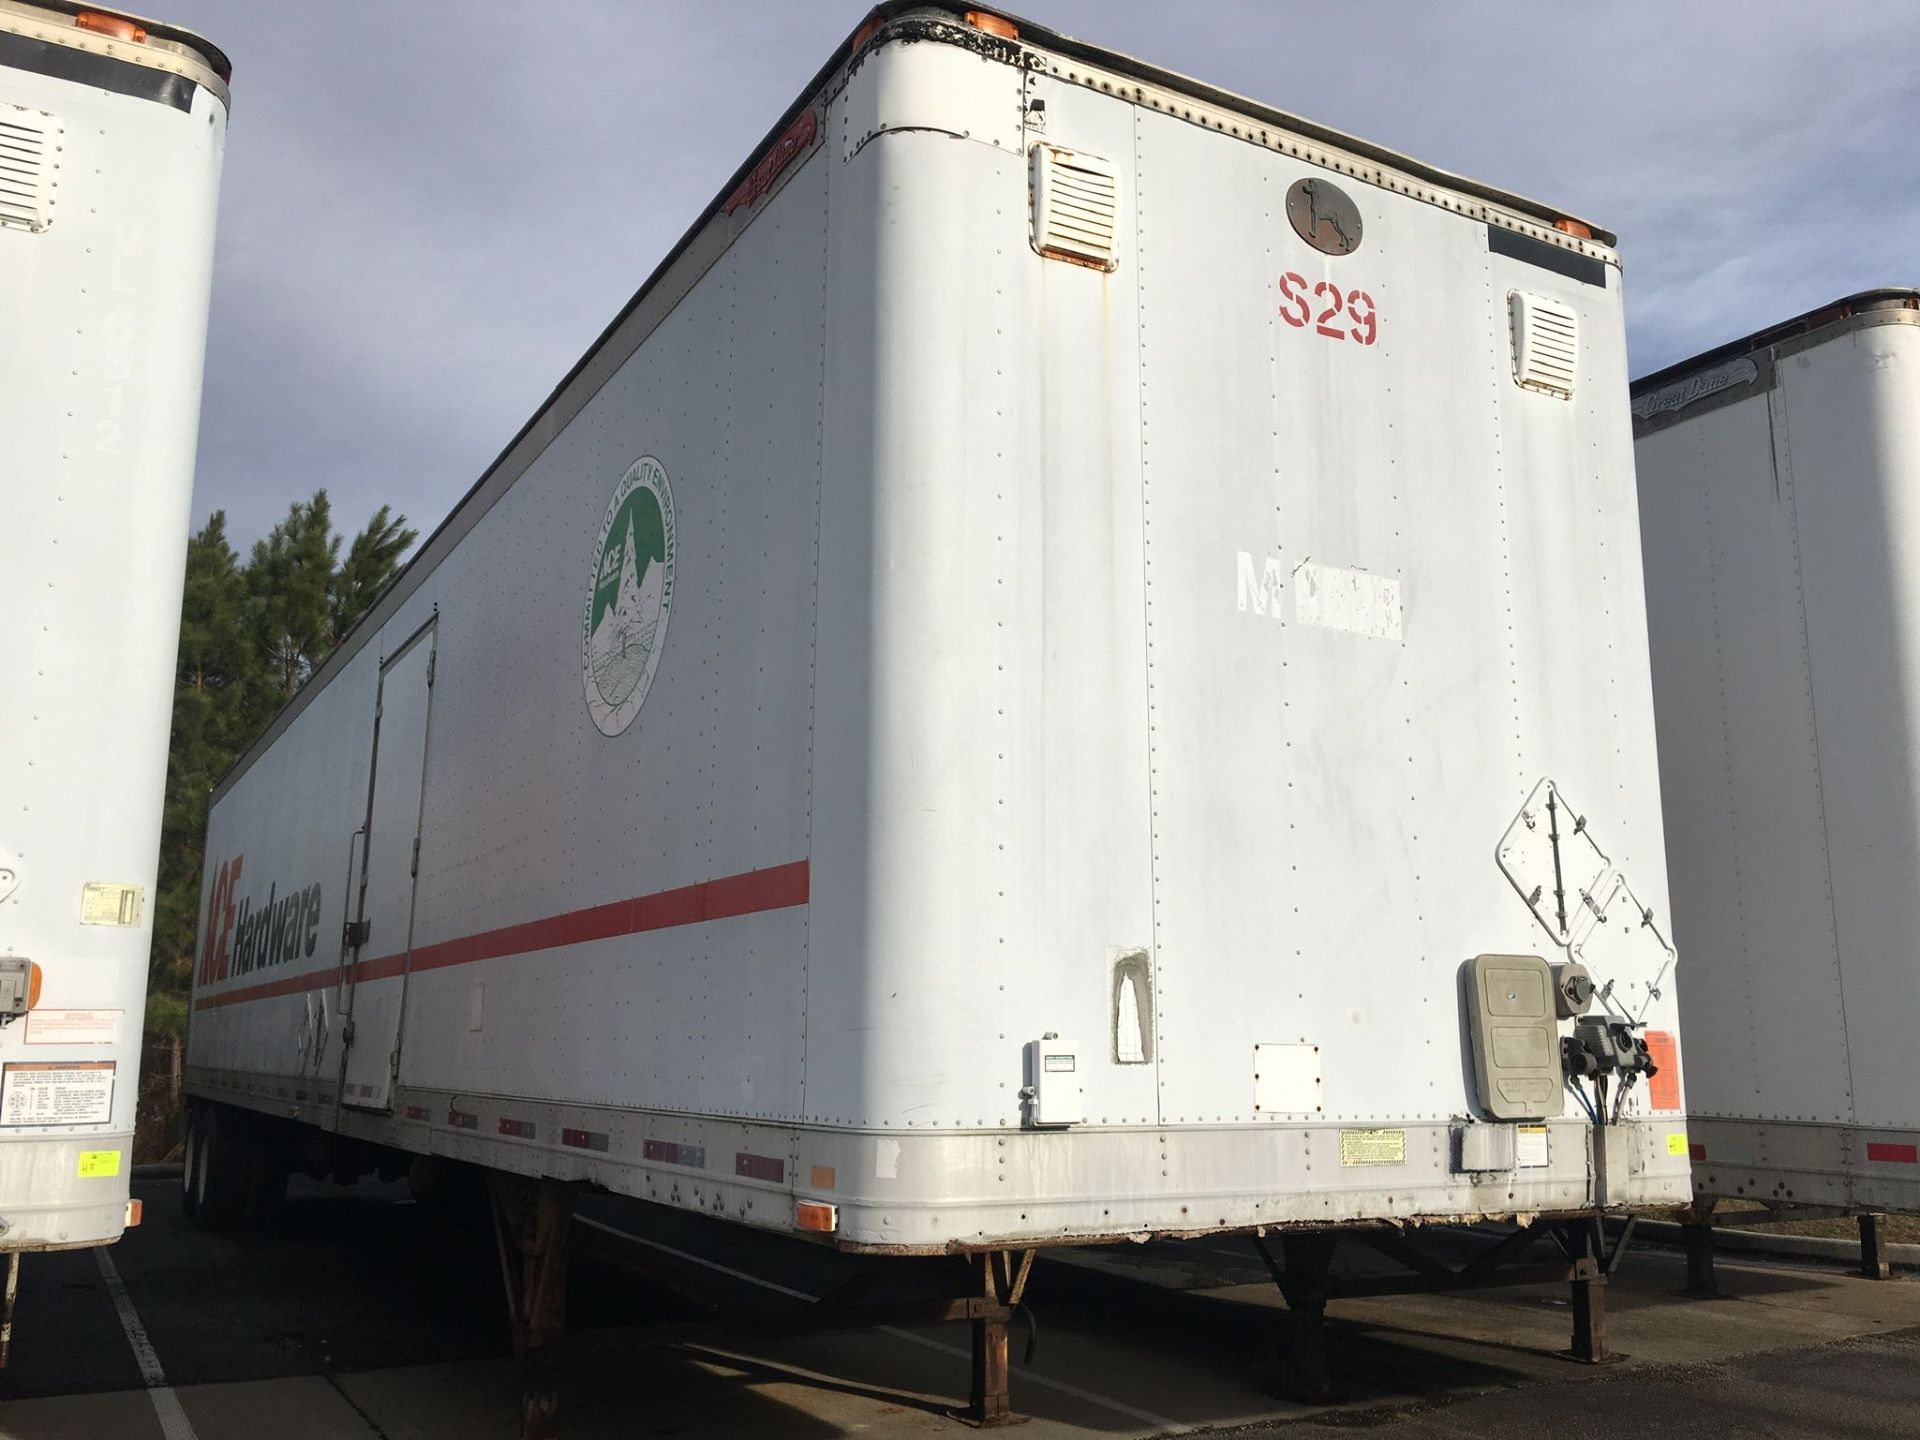 Trailer, Make: Great Dane. Year: 1996. Trailer #: S29. VIN: 1GRAA962XT5011214. Sold with a Bill of